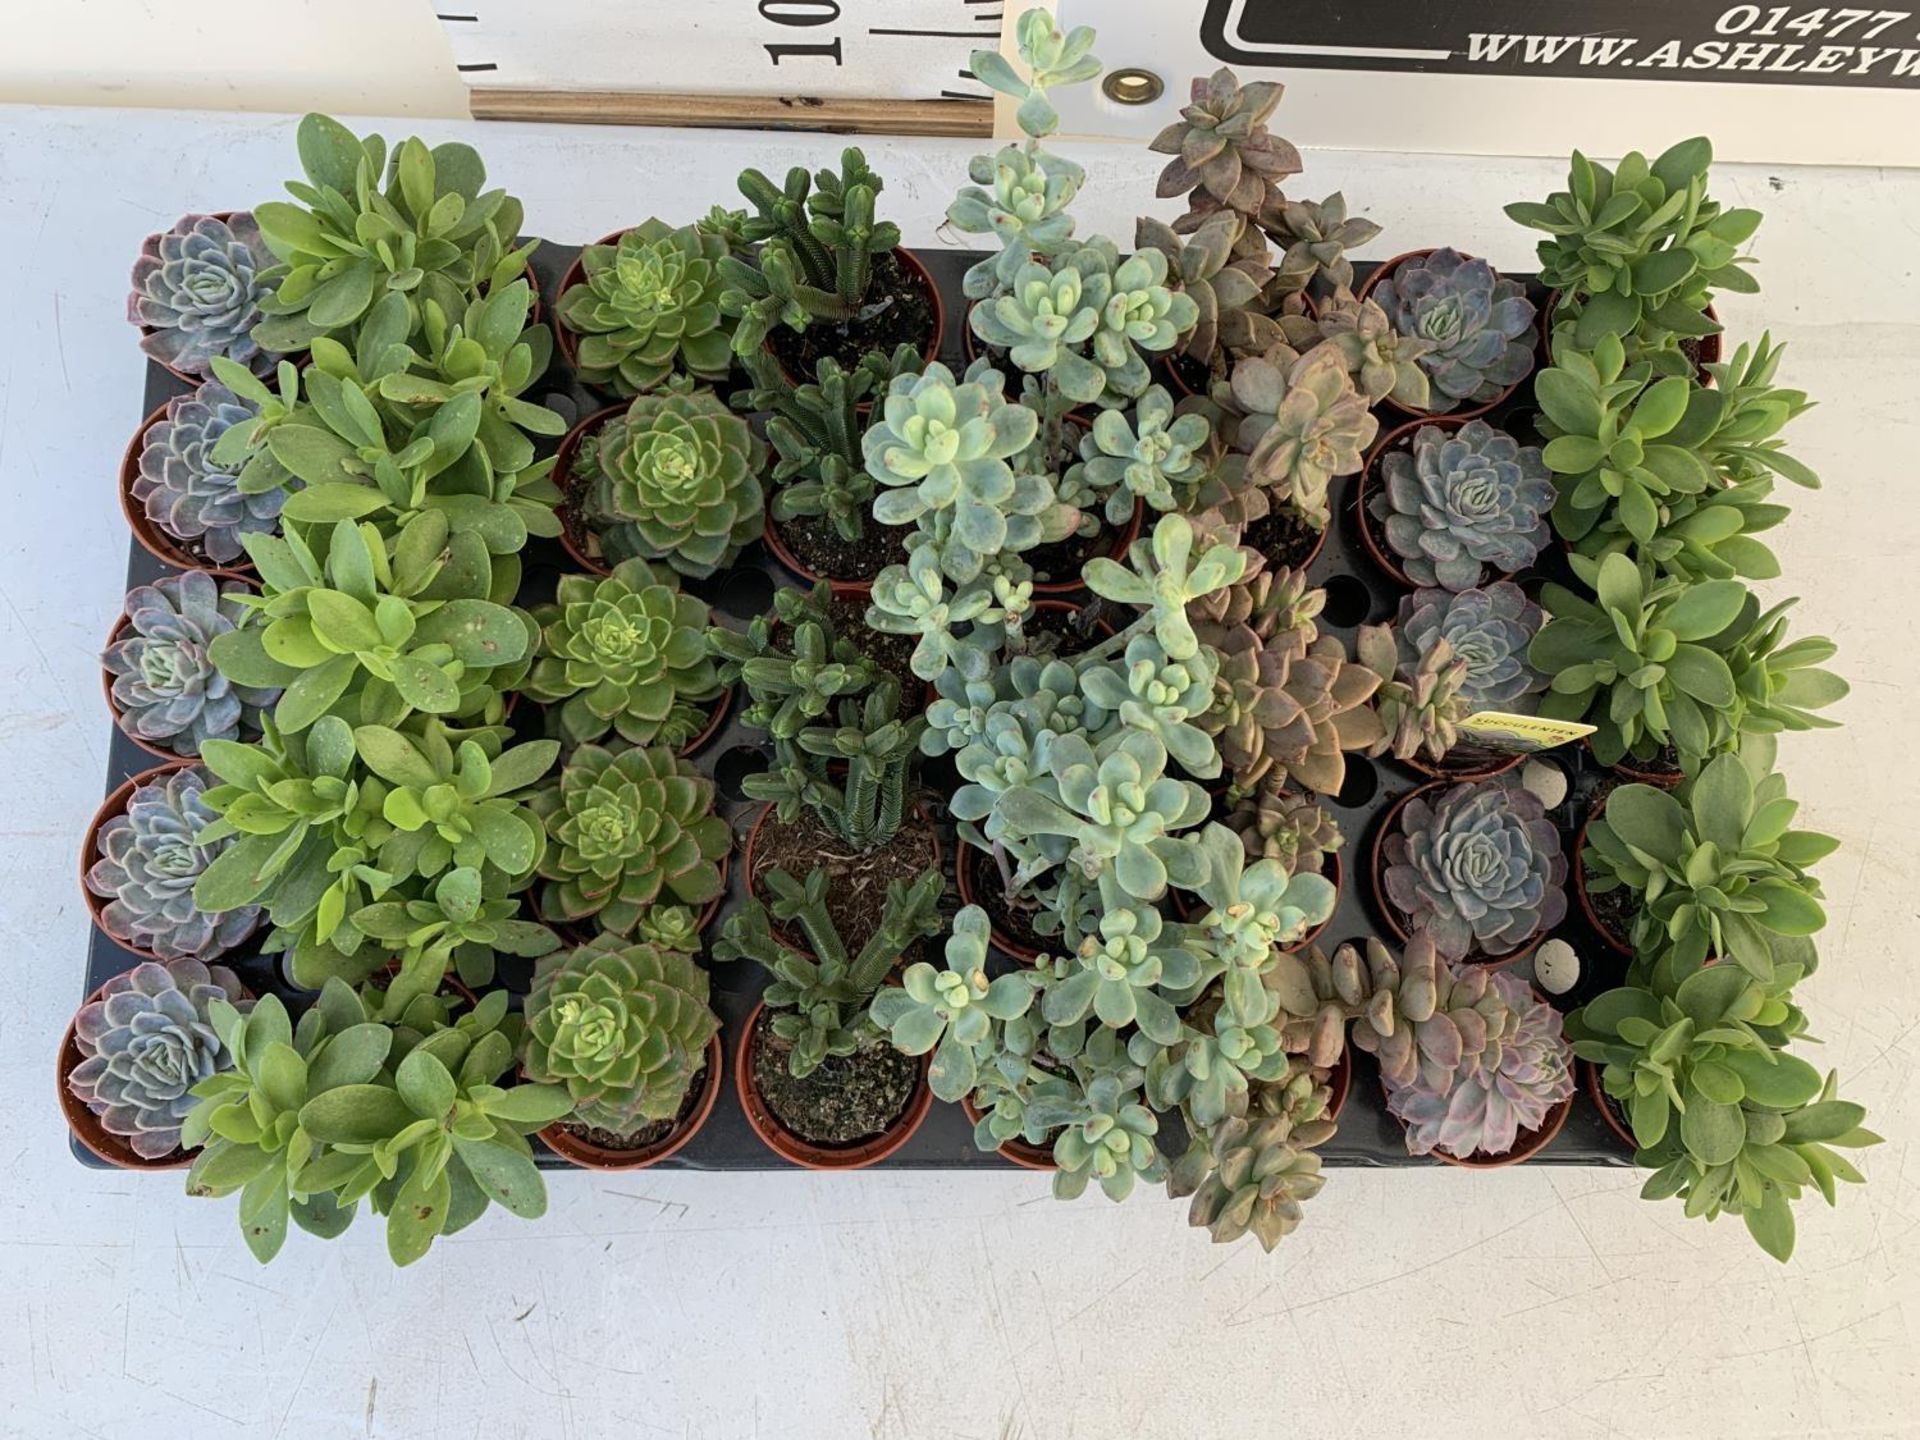 TRAY OF 40 MIXED VARIETIES OF SUCCULENTS PLUS VAT TO BE SOLD FOR THE FORTY - Image 2 of 6